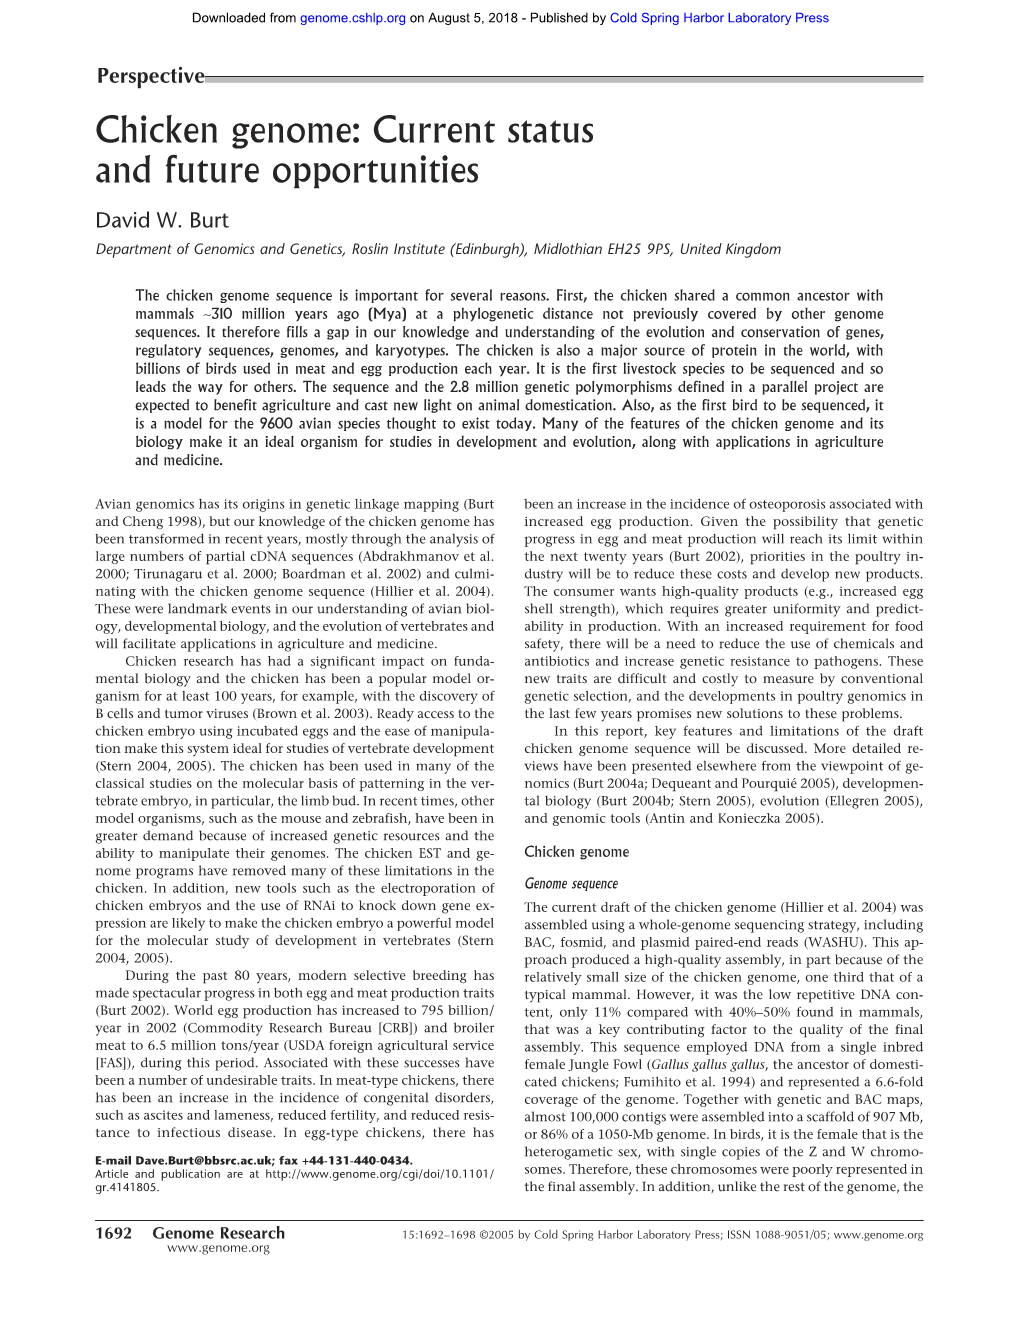 Chicken Genome: Current Status and Future Opportunities